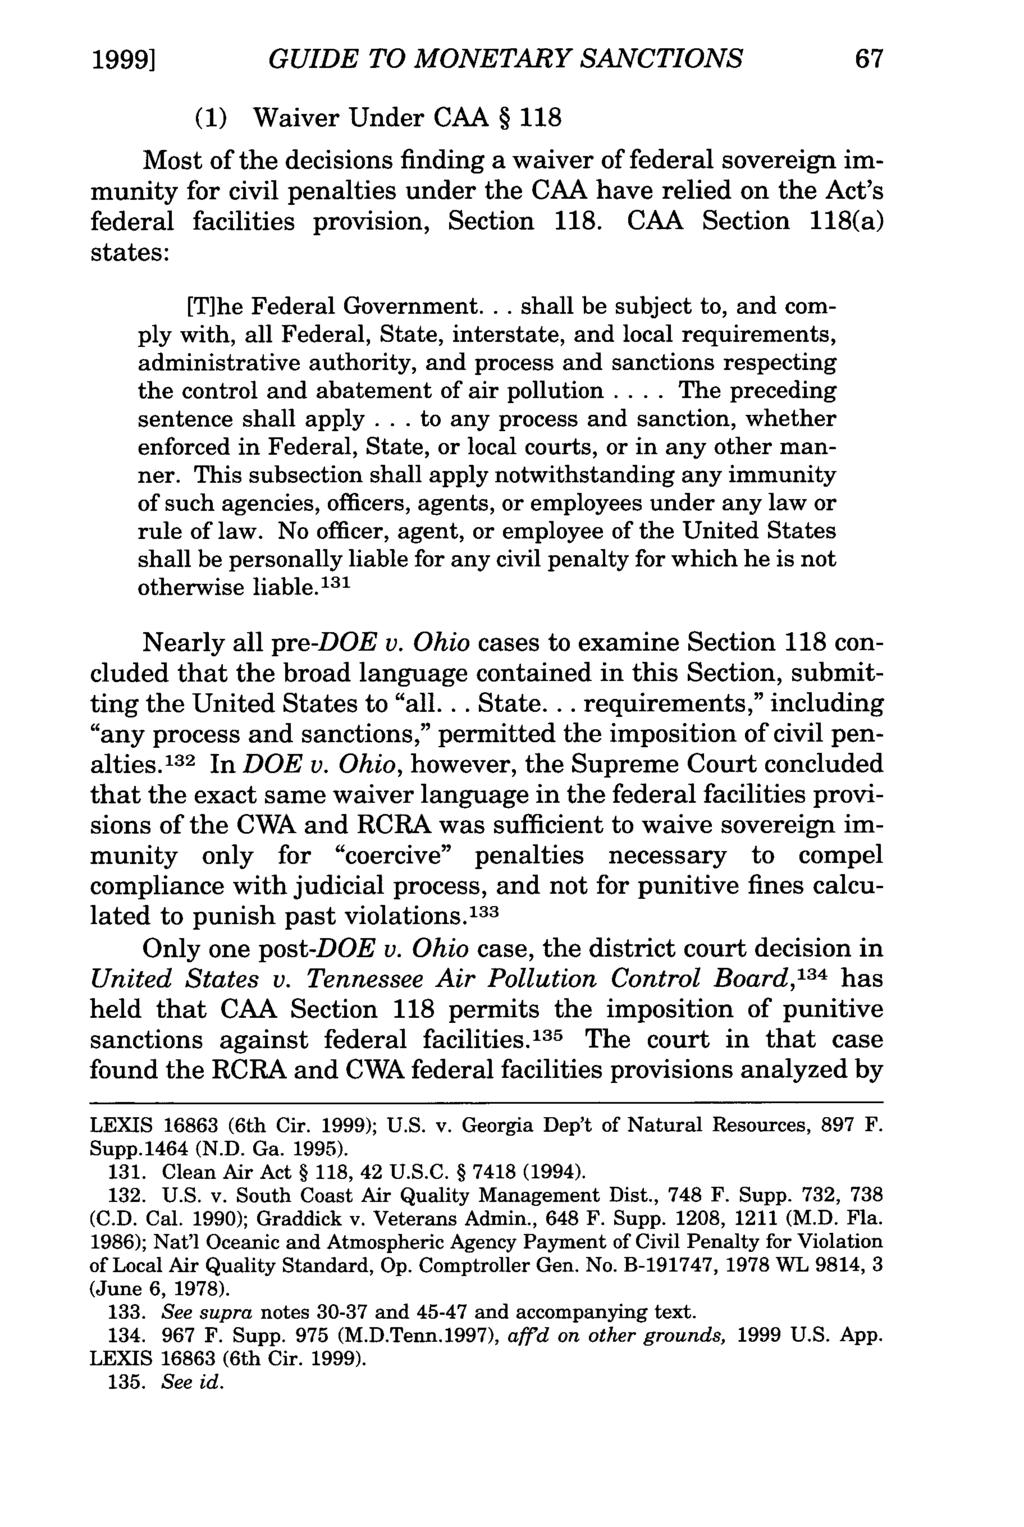 1999] GUIDE TO MONETARY SANCTIONS (1) Waiver Under CAA 118 Most of the decisions finding a waiver of federal sovereign immunity for civil penalties under the CAA have relied on the Act's federal